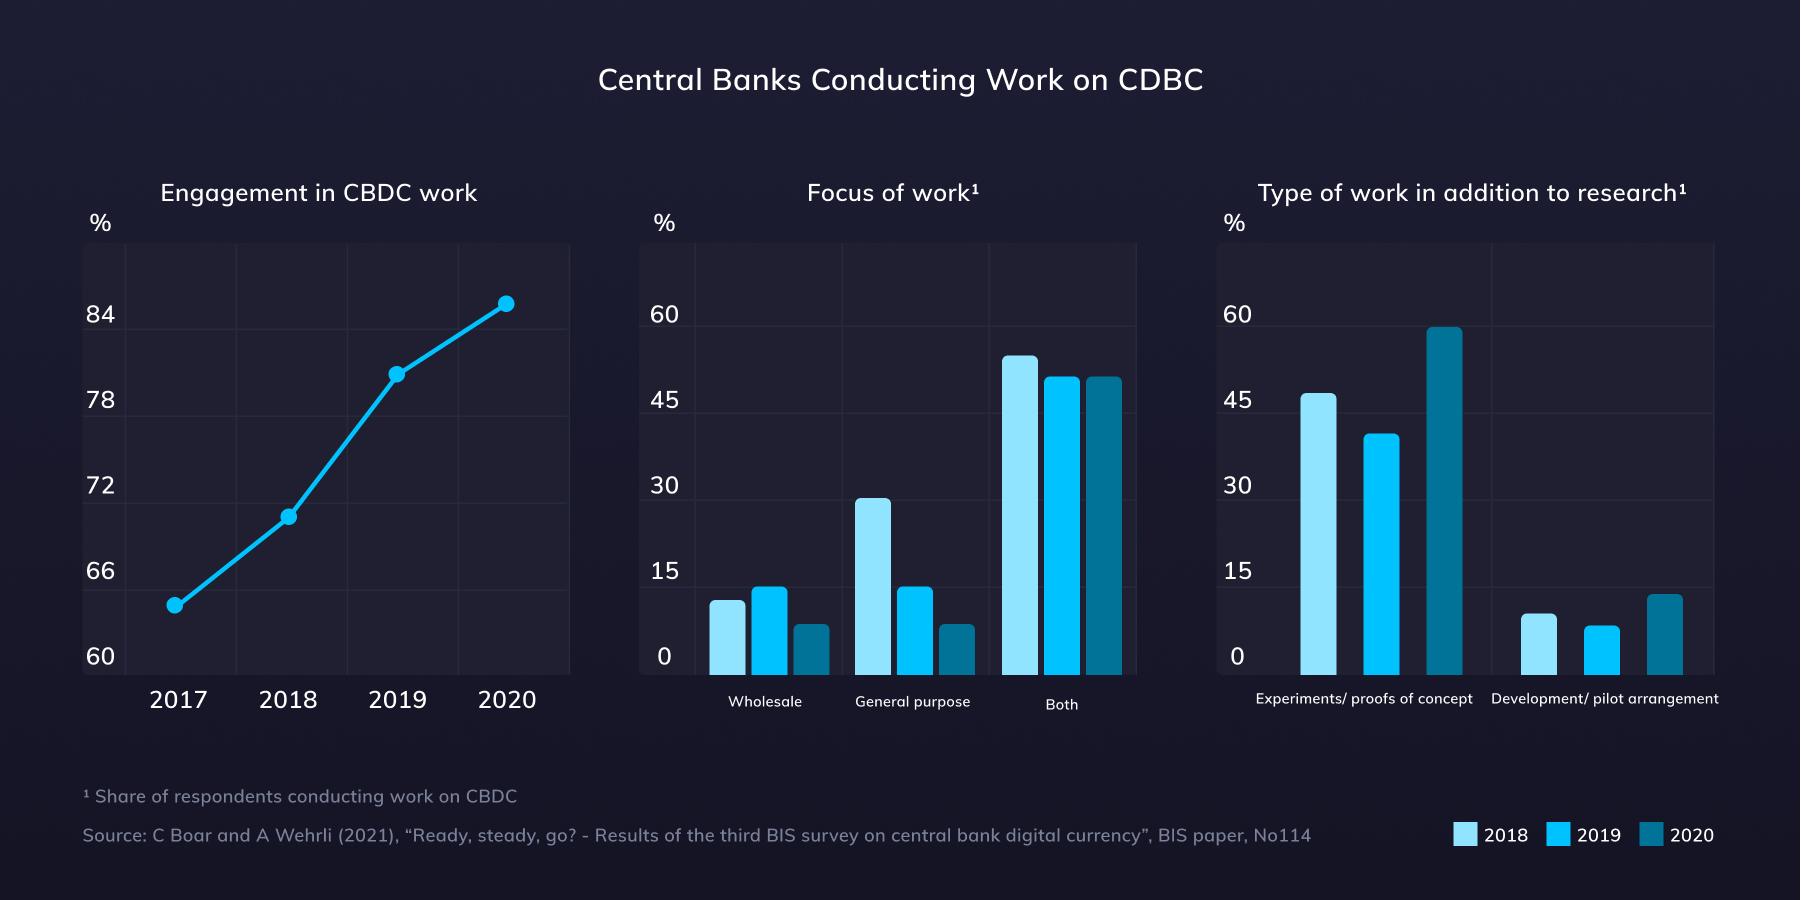 Central banks work on advancing CBDC further